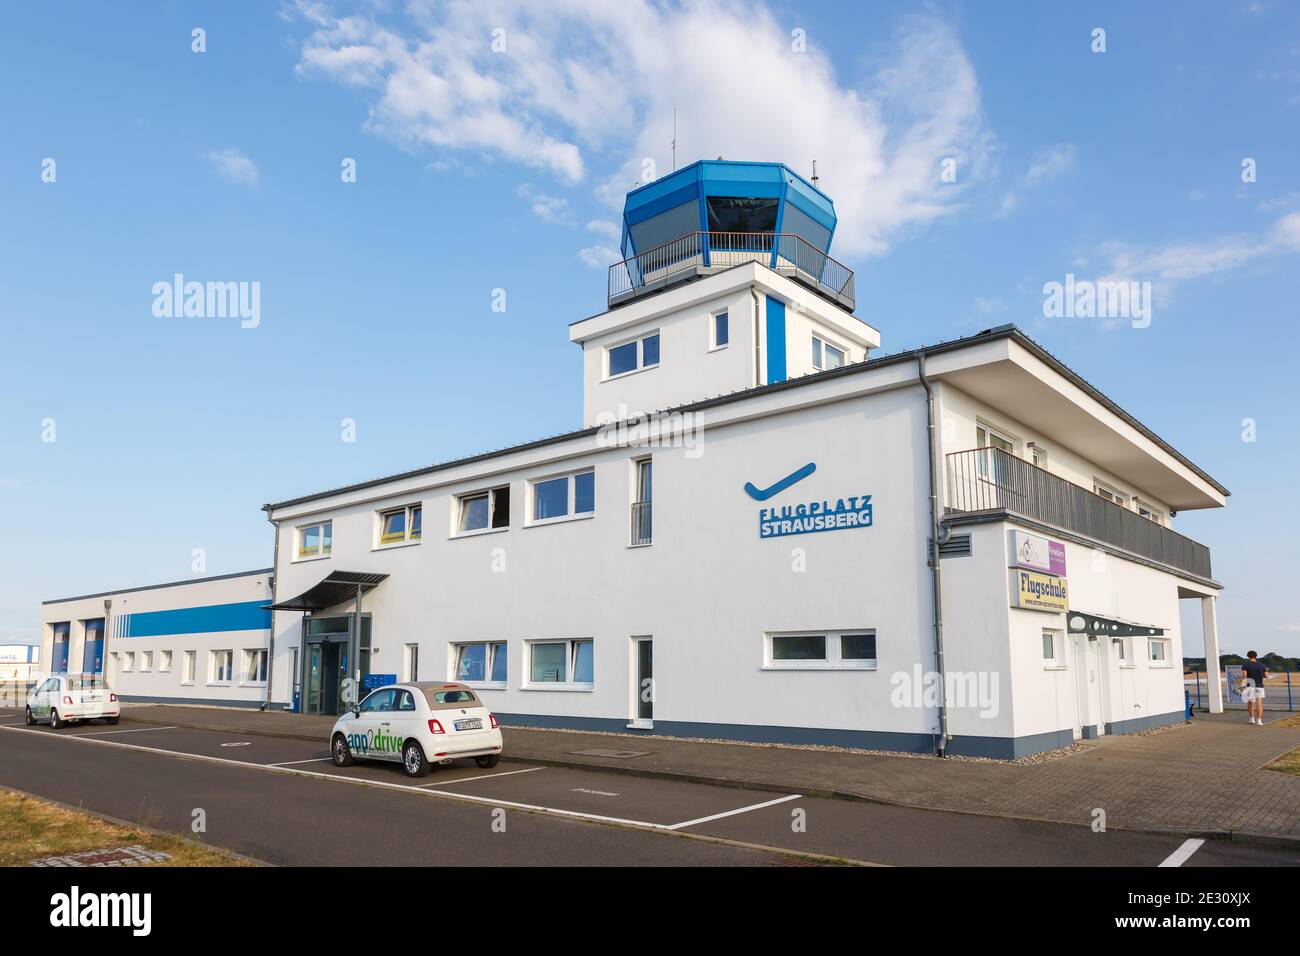 Strausberg, Germany - August 19, 2020: Strausberg Airport Terminal and Tower in Germany. Stock Photo